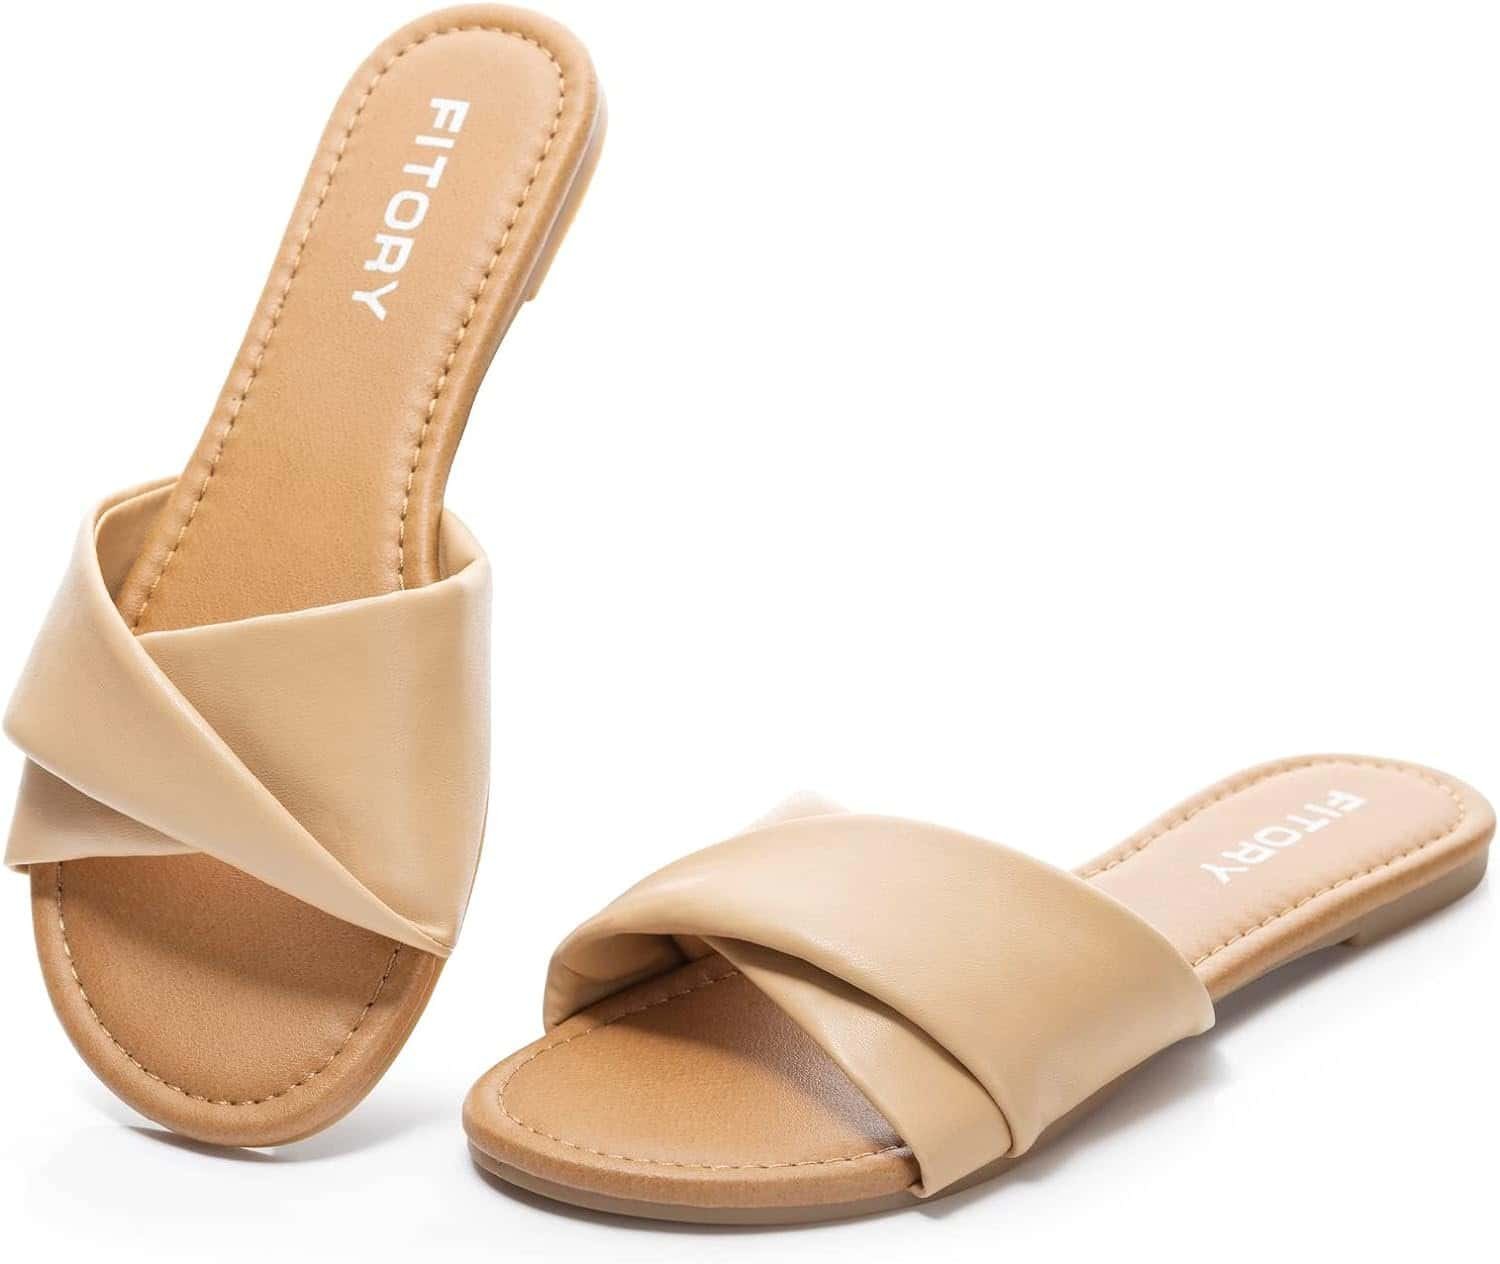 FITORY Womens Flat Sandals Fashion Slides With Soft Leather Slippers for Summer Size 6-11